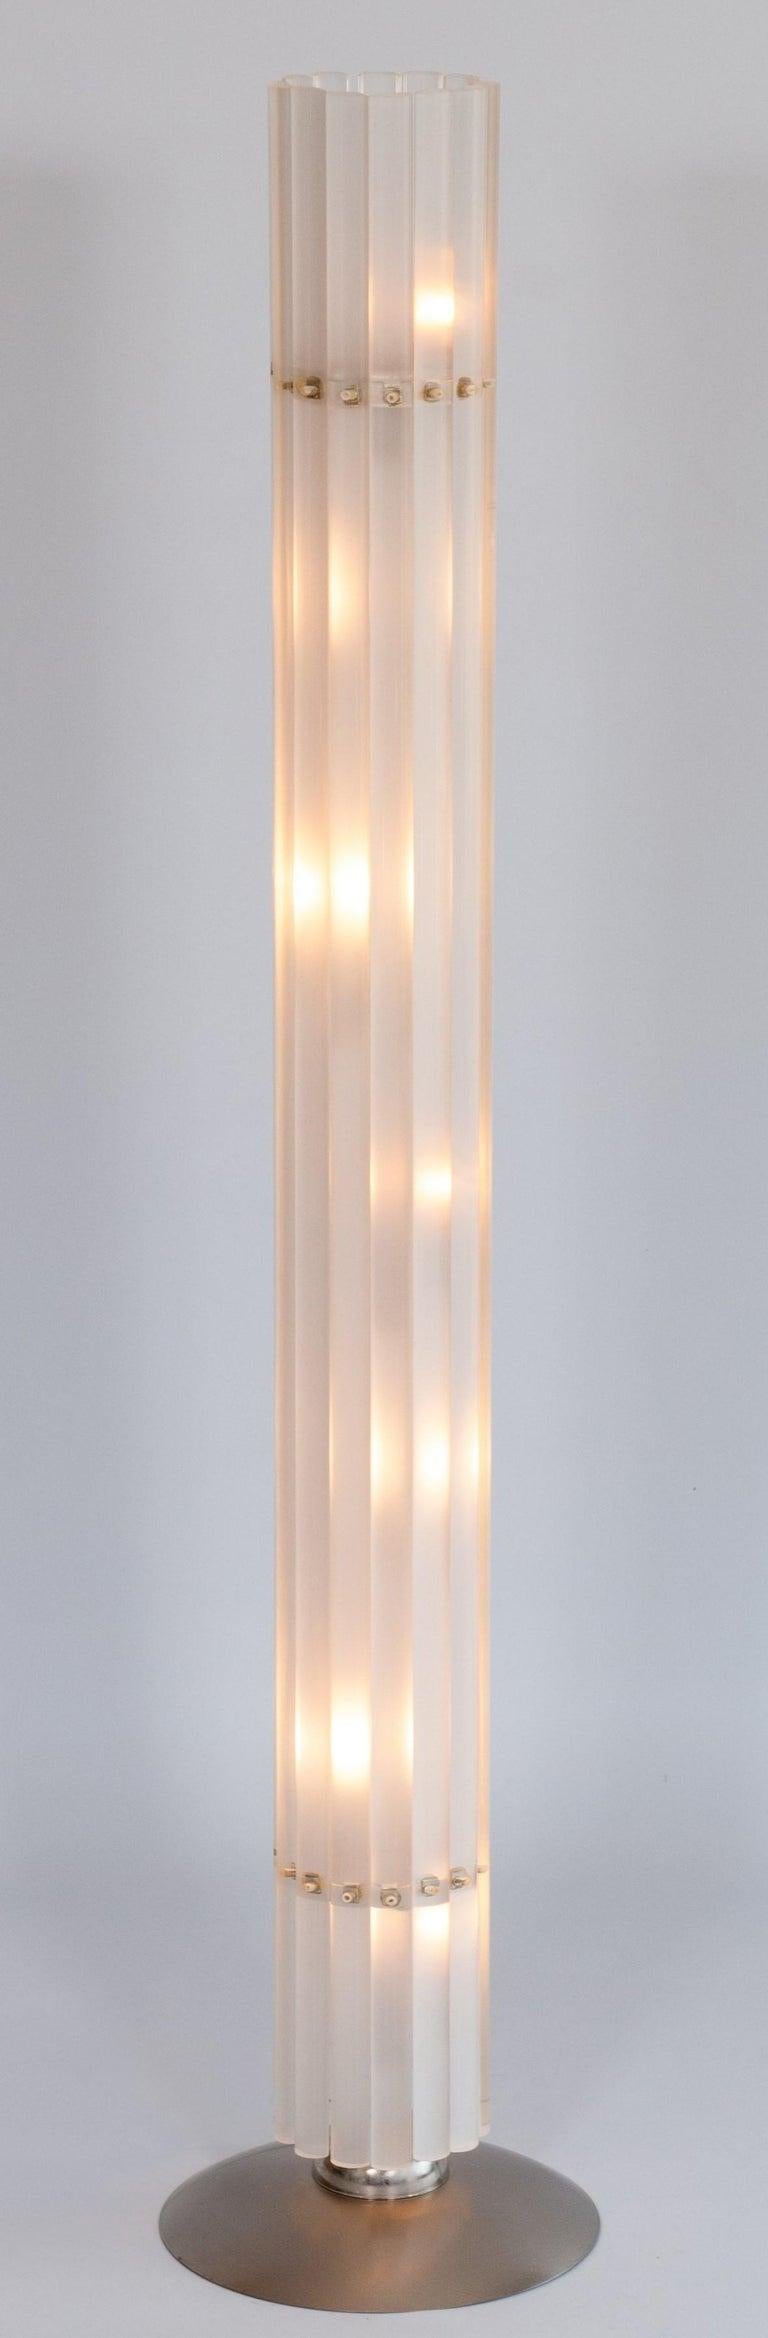 Hand-Crafted Customizable White Cylinder Floor Lamp in Blown Murano Glass, Italy Contemporary For Sale